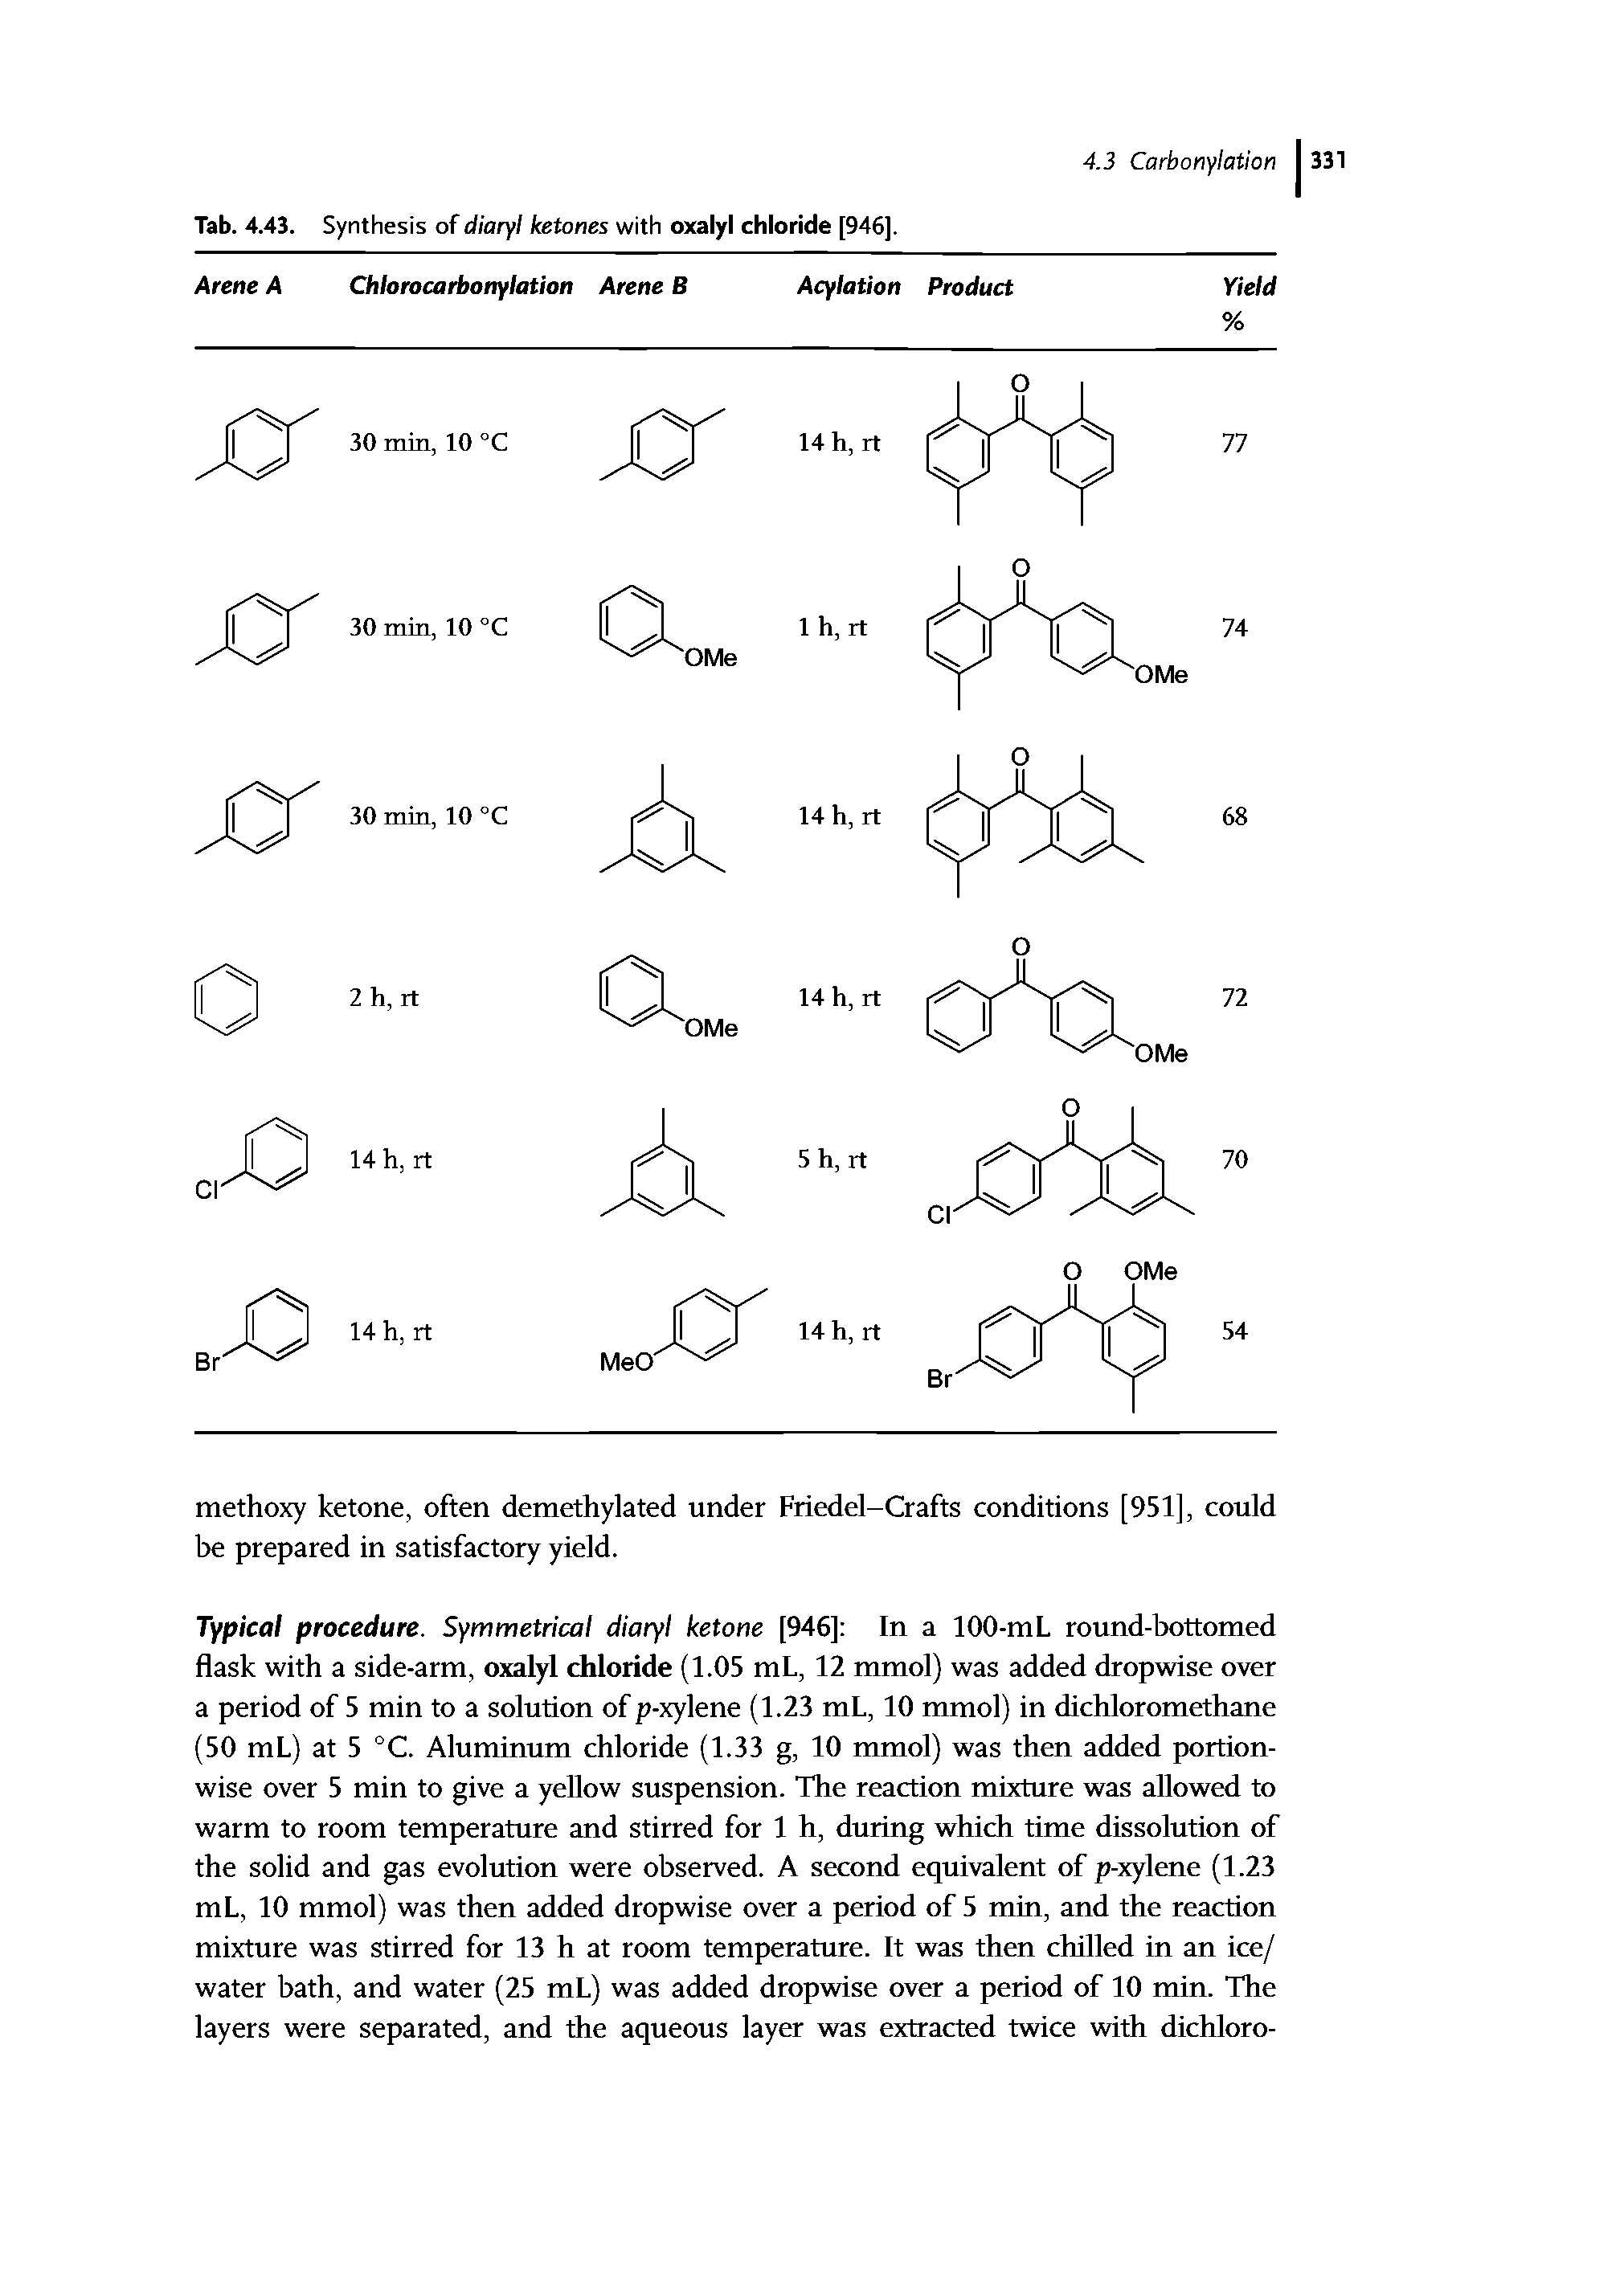 Tab. 4.43. Synthesis of diaryl ketones with oxalyl chloride [946].